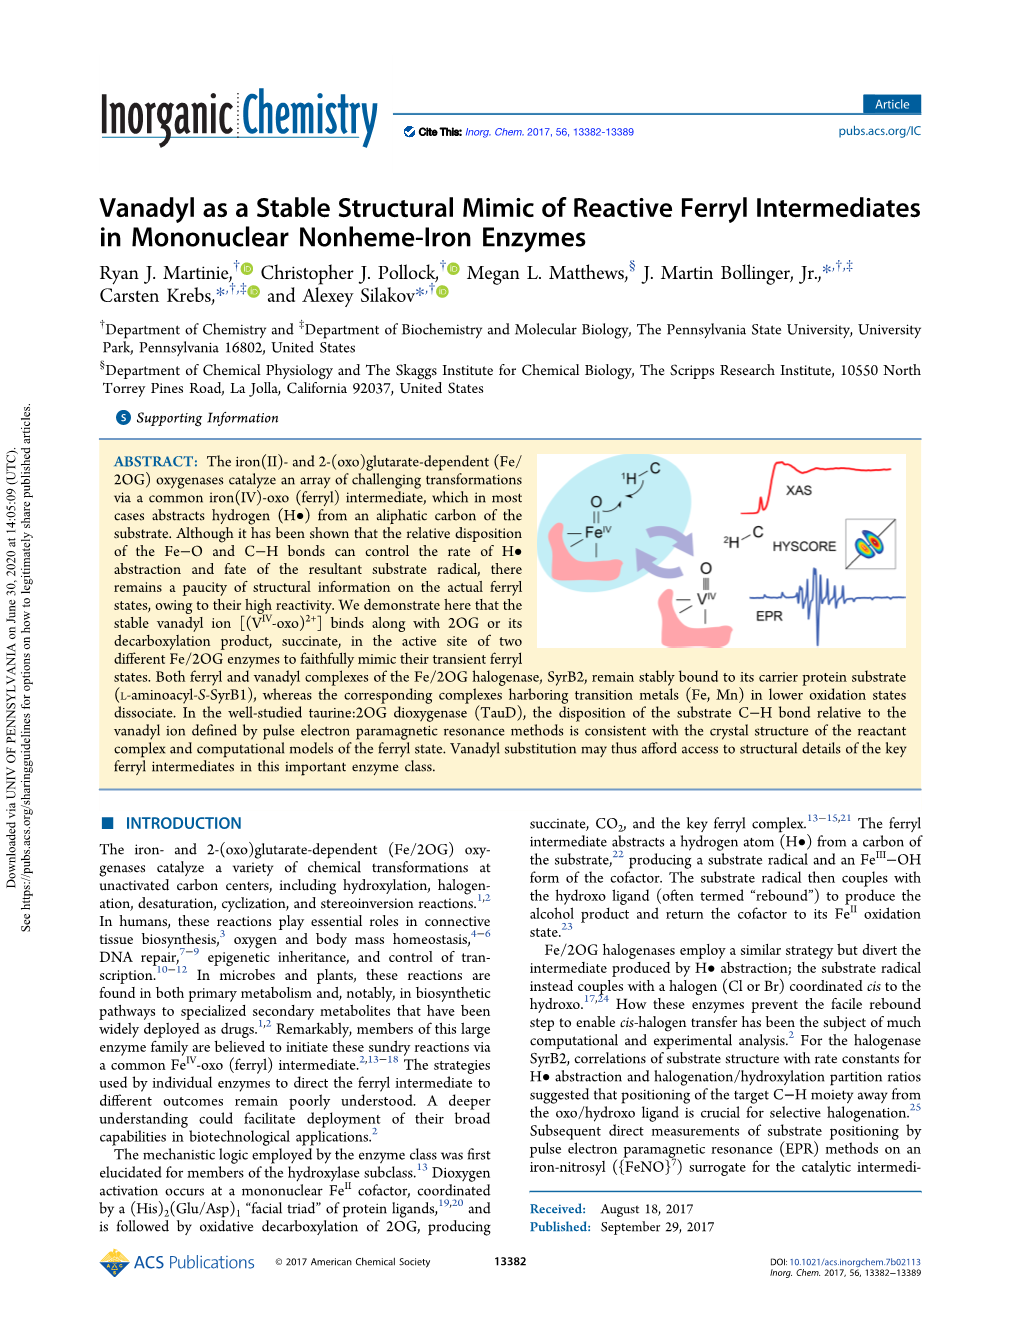 Vanadyl As a Stable Structural Mimic of Reactive Ferryl Intermediates in Mononuclear Nonheme-Iron Enzymes † † § † ‡ Ryan J